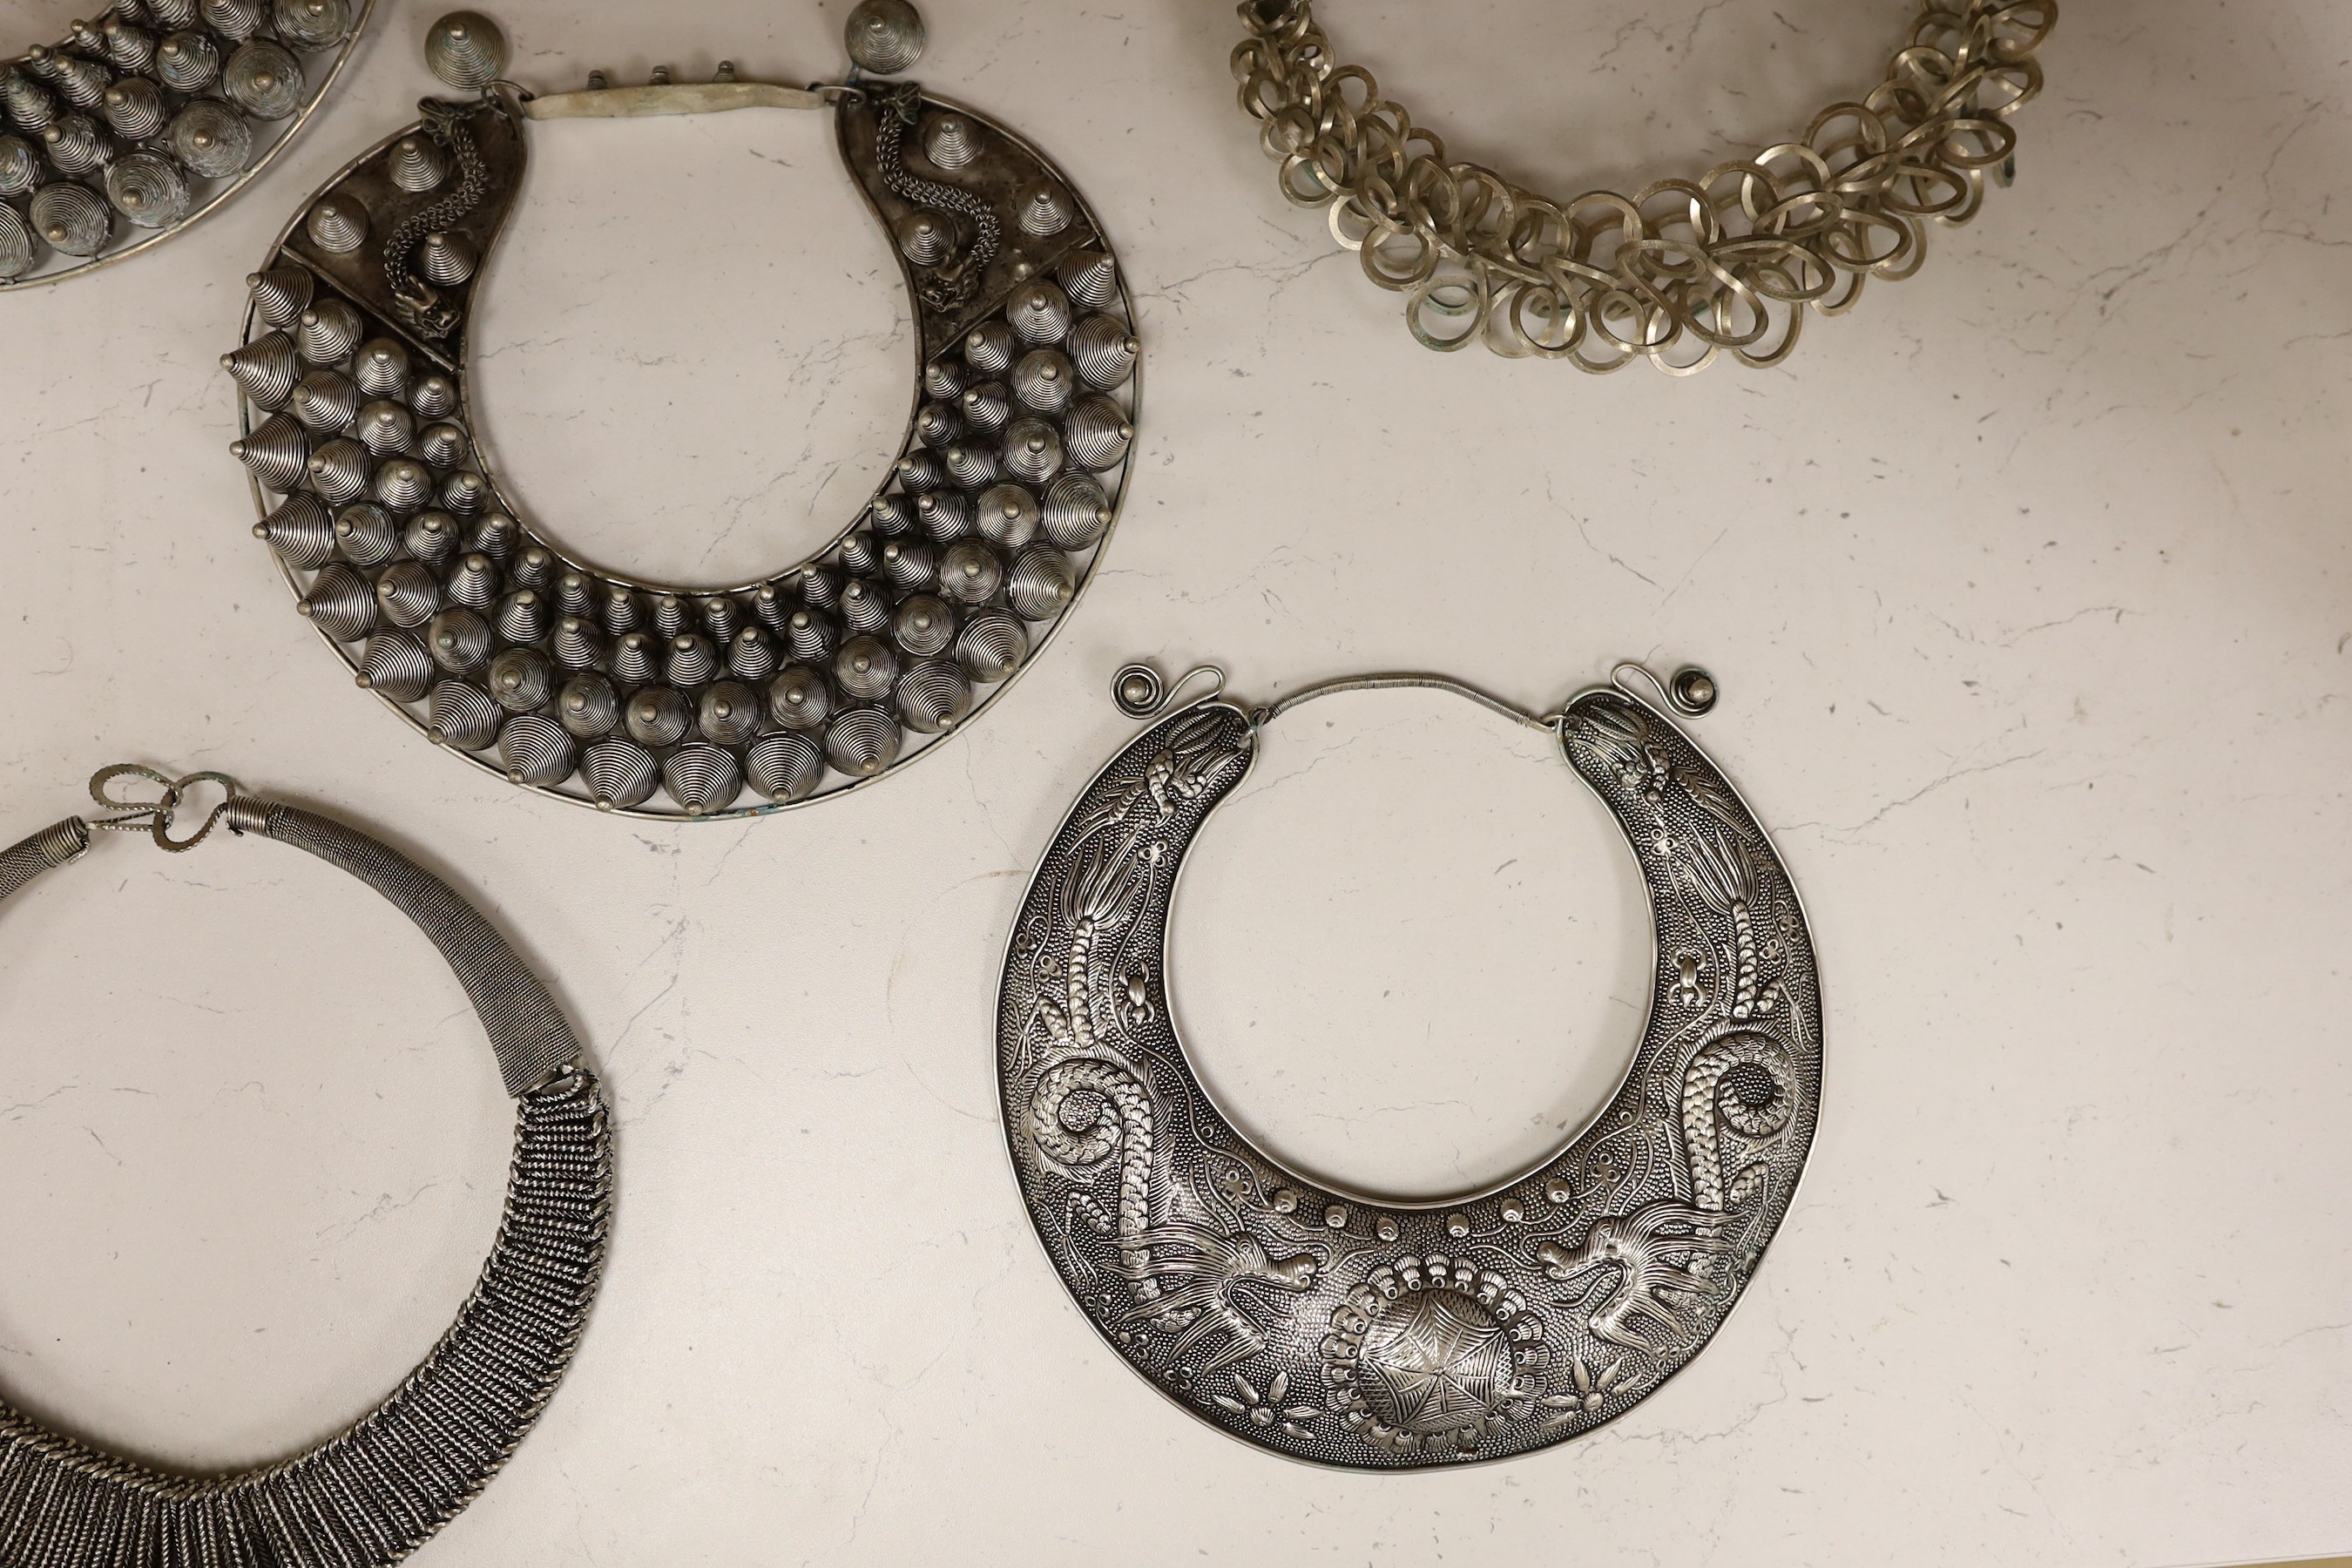 Six various south East Asian white metal collars